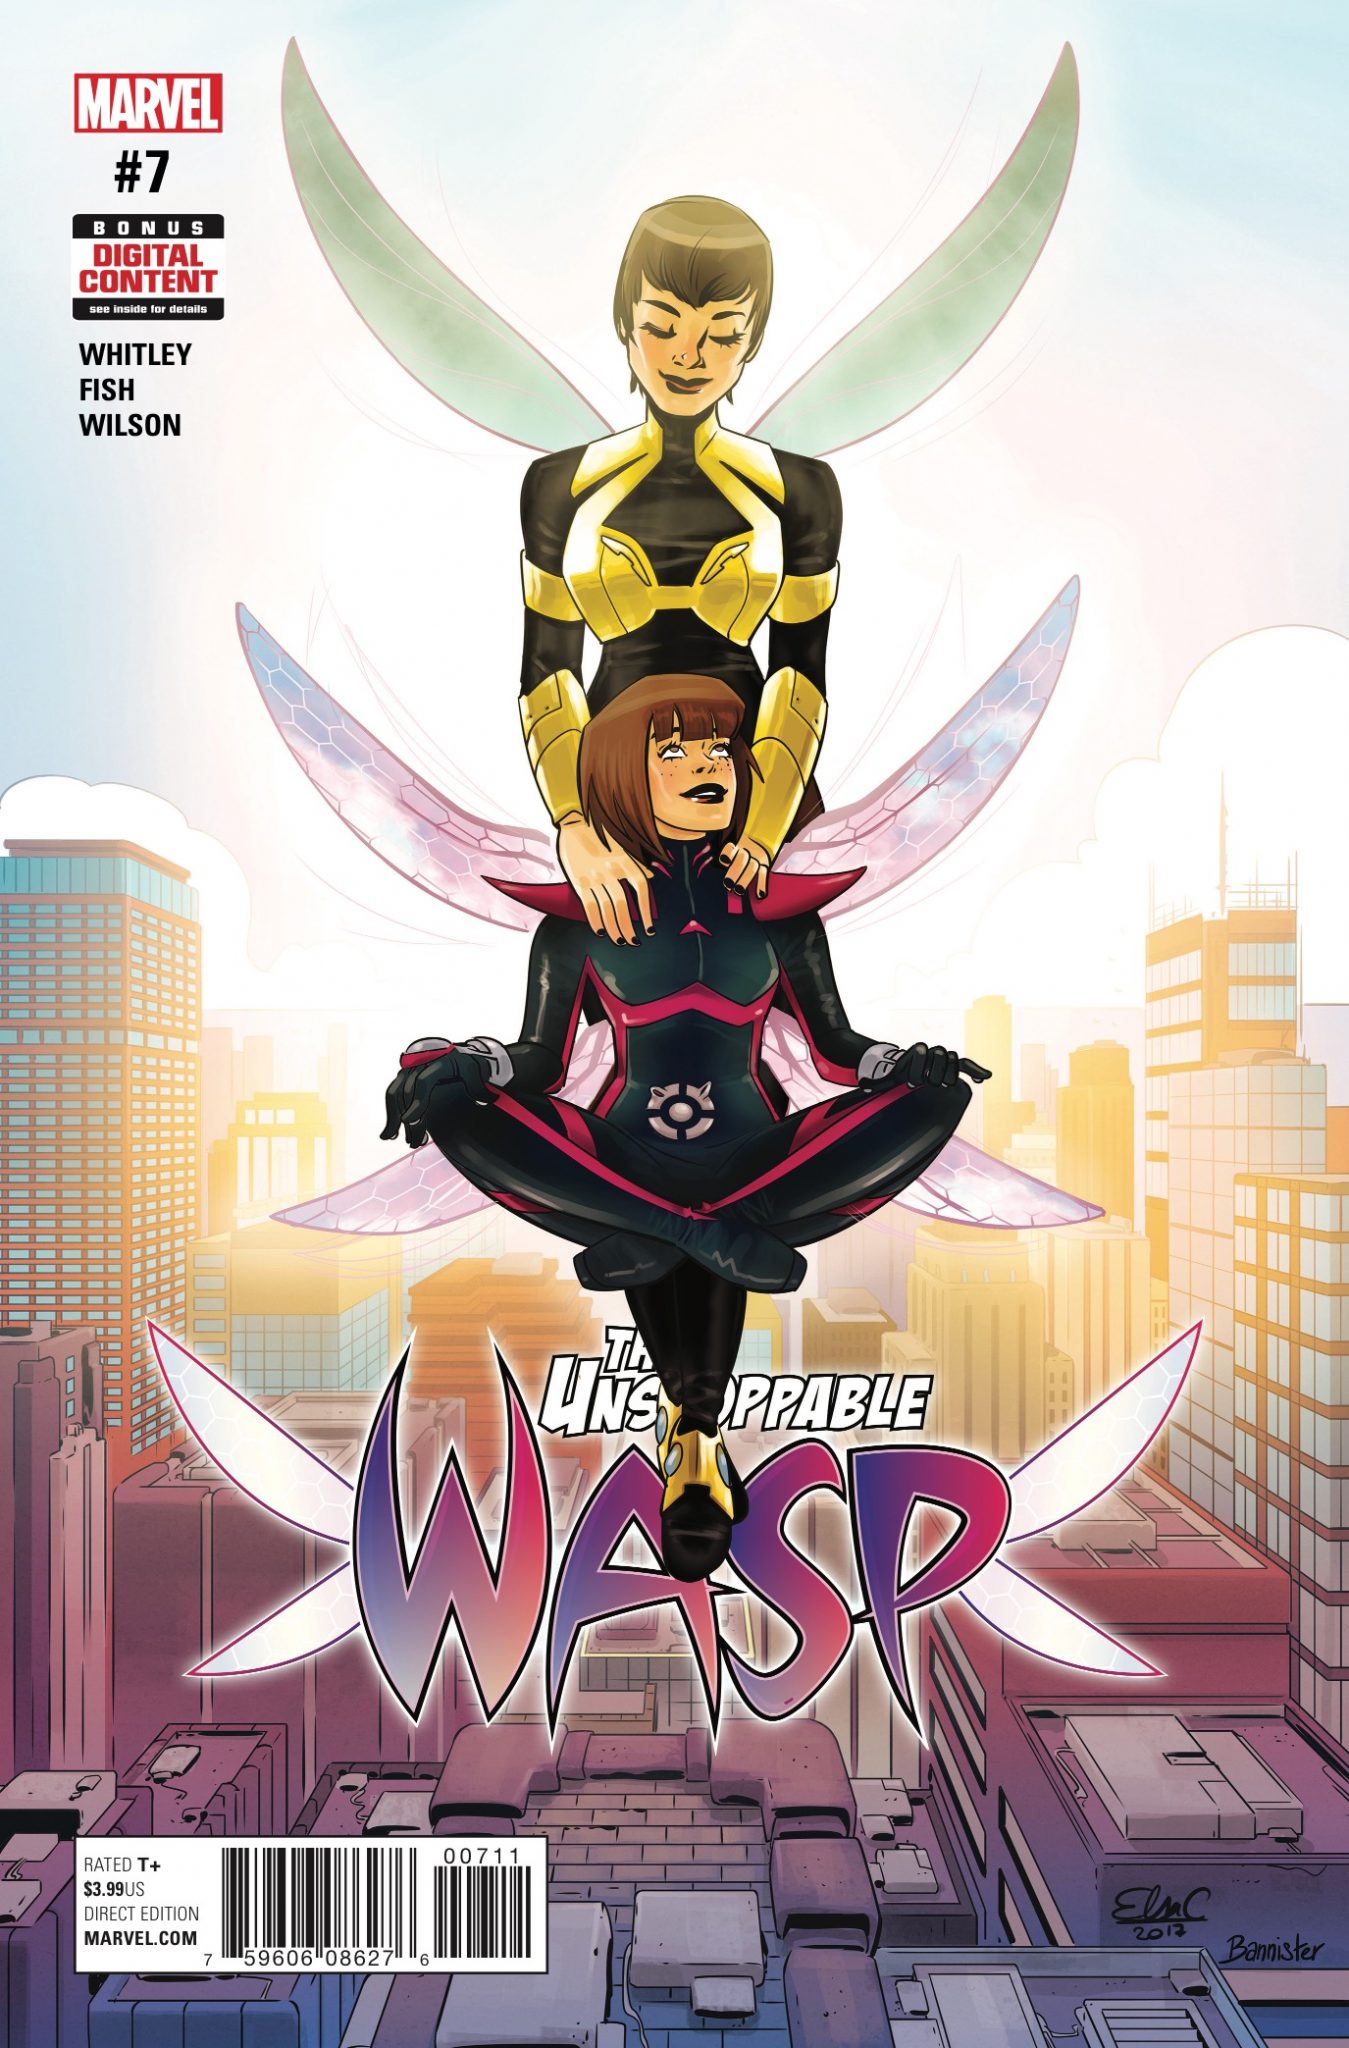 Marvel Preview: The Unstoppable Wasp #7